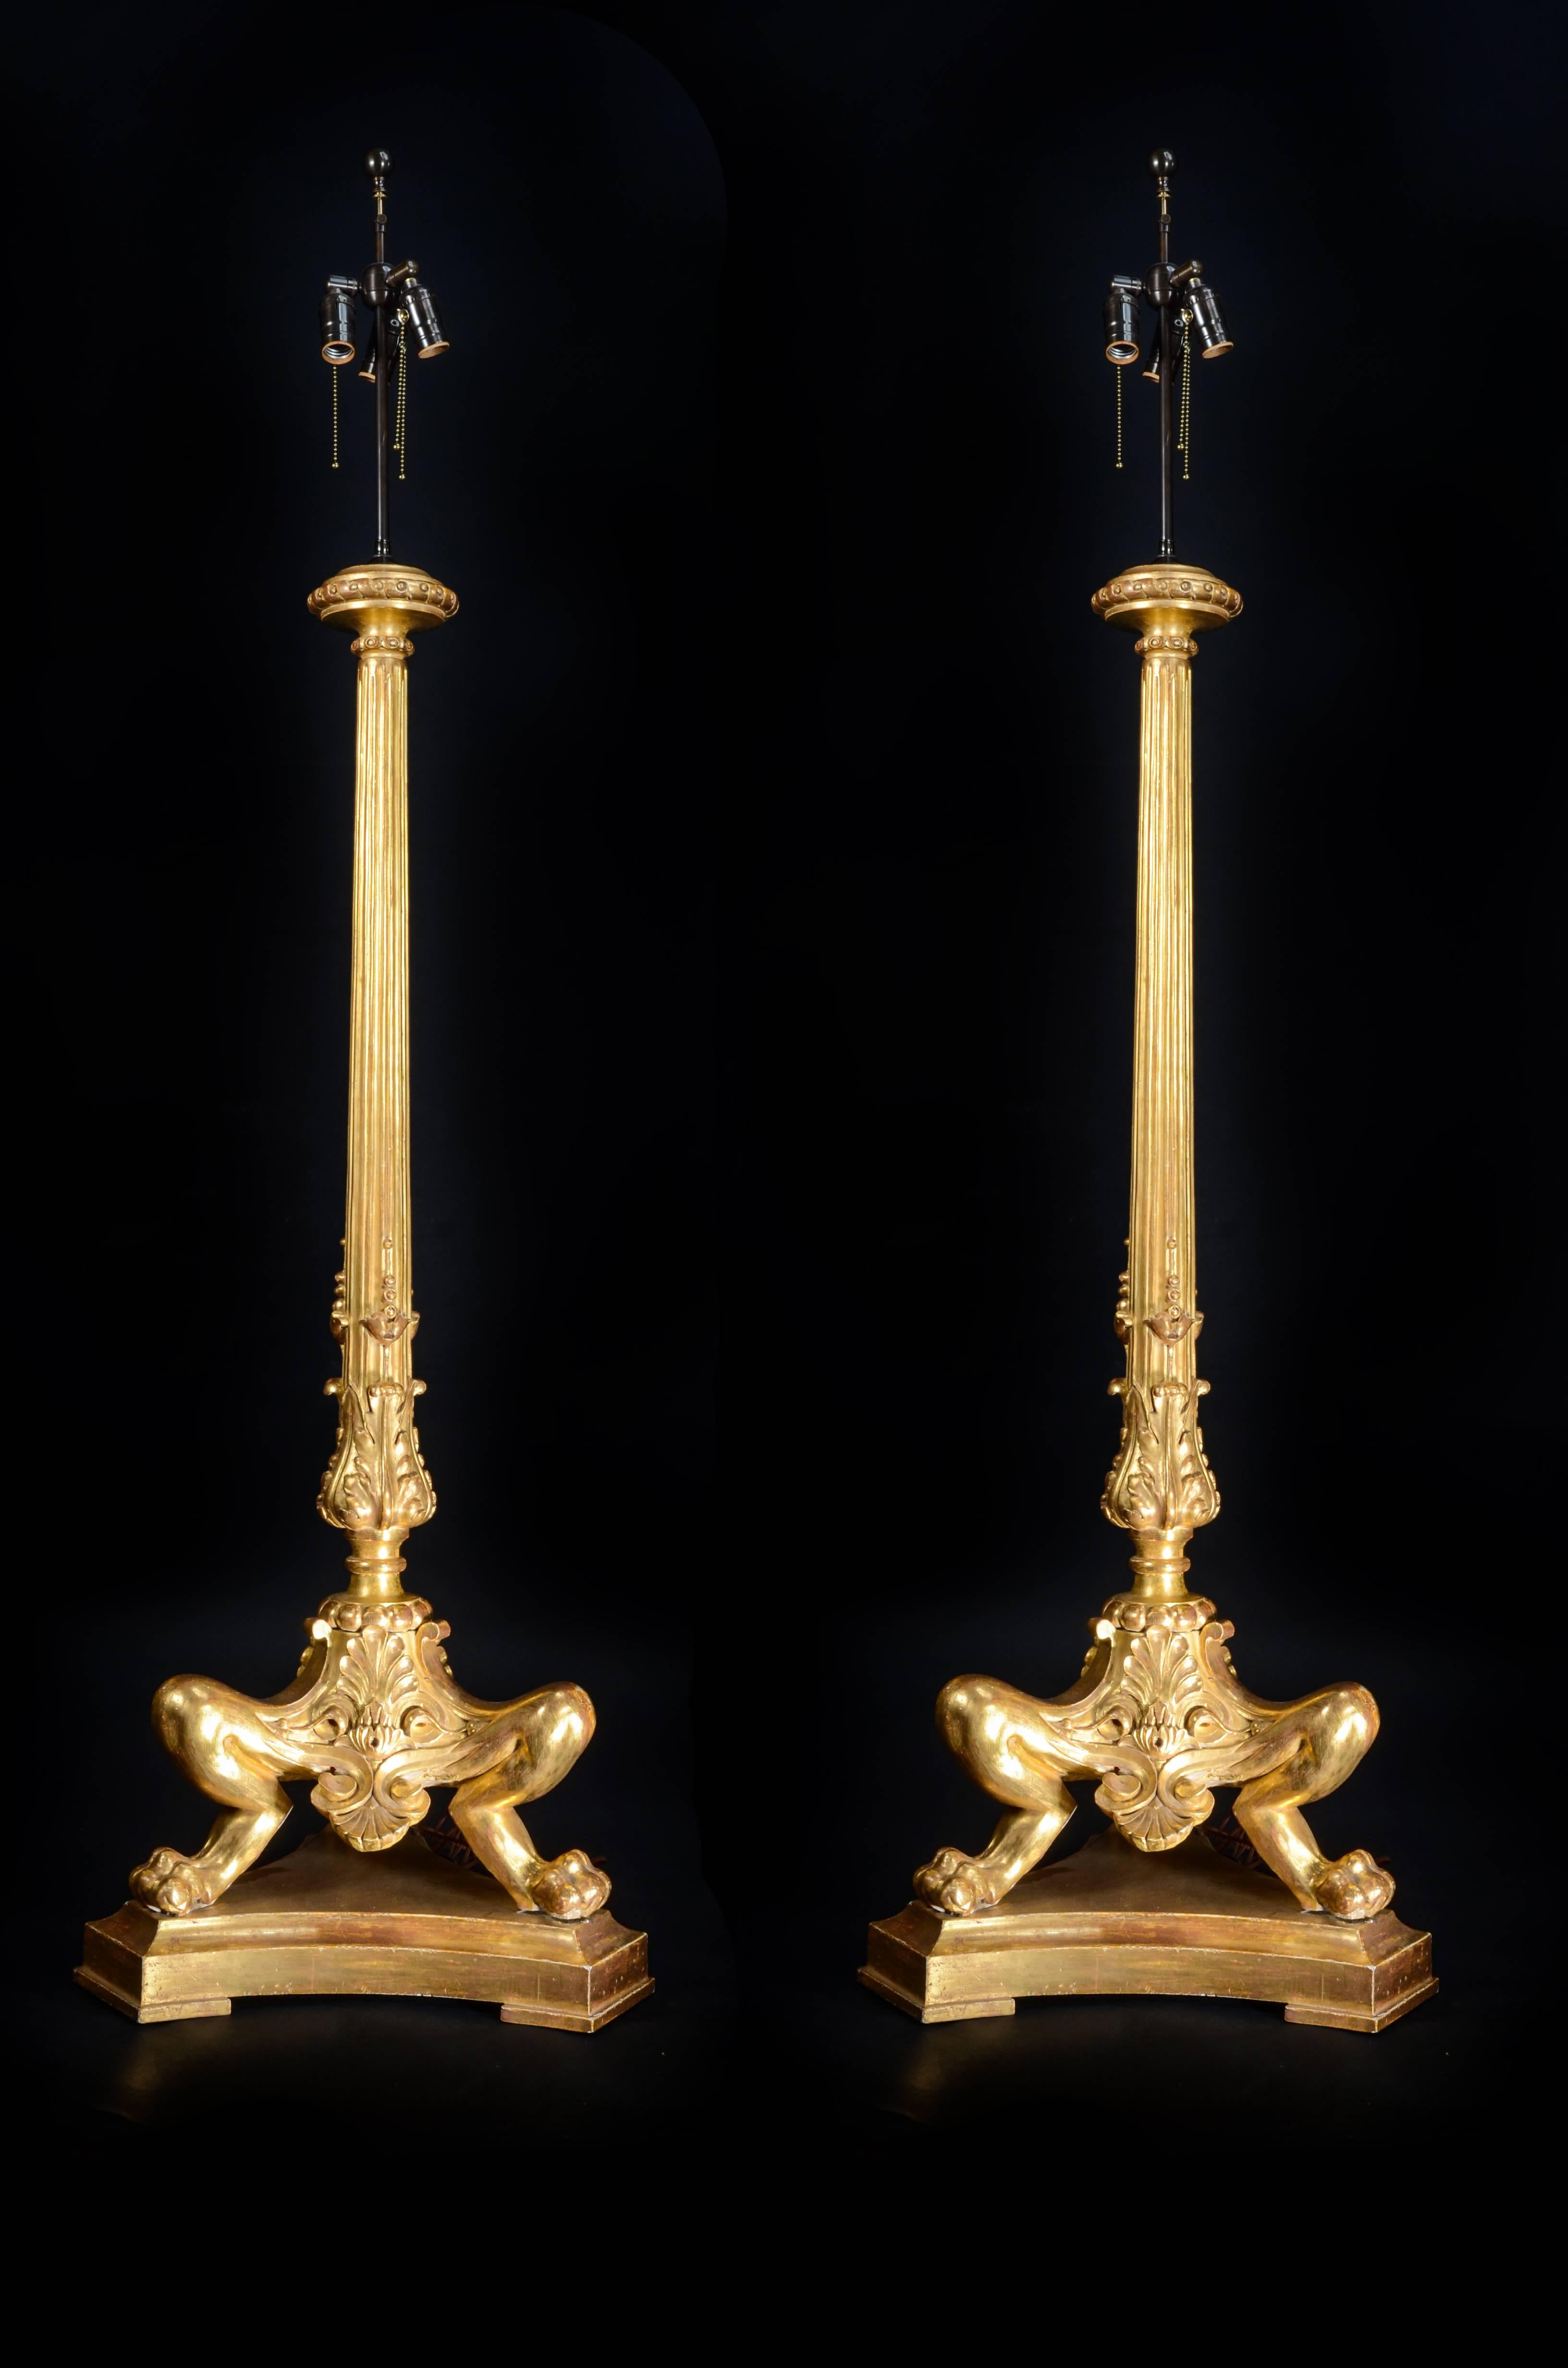 European Pair of Antique French Neoclassical Style Carved Giltwood Floor Lamps